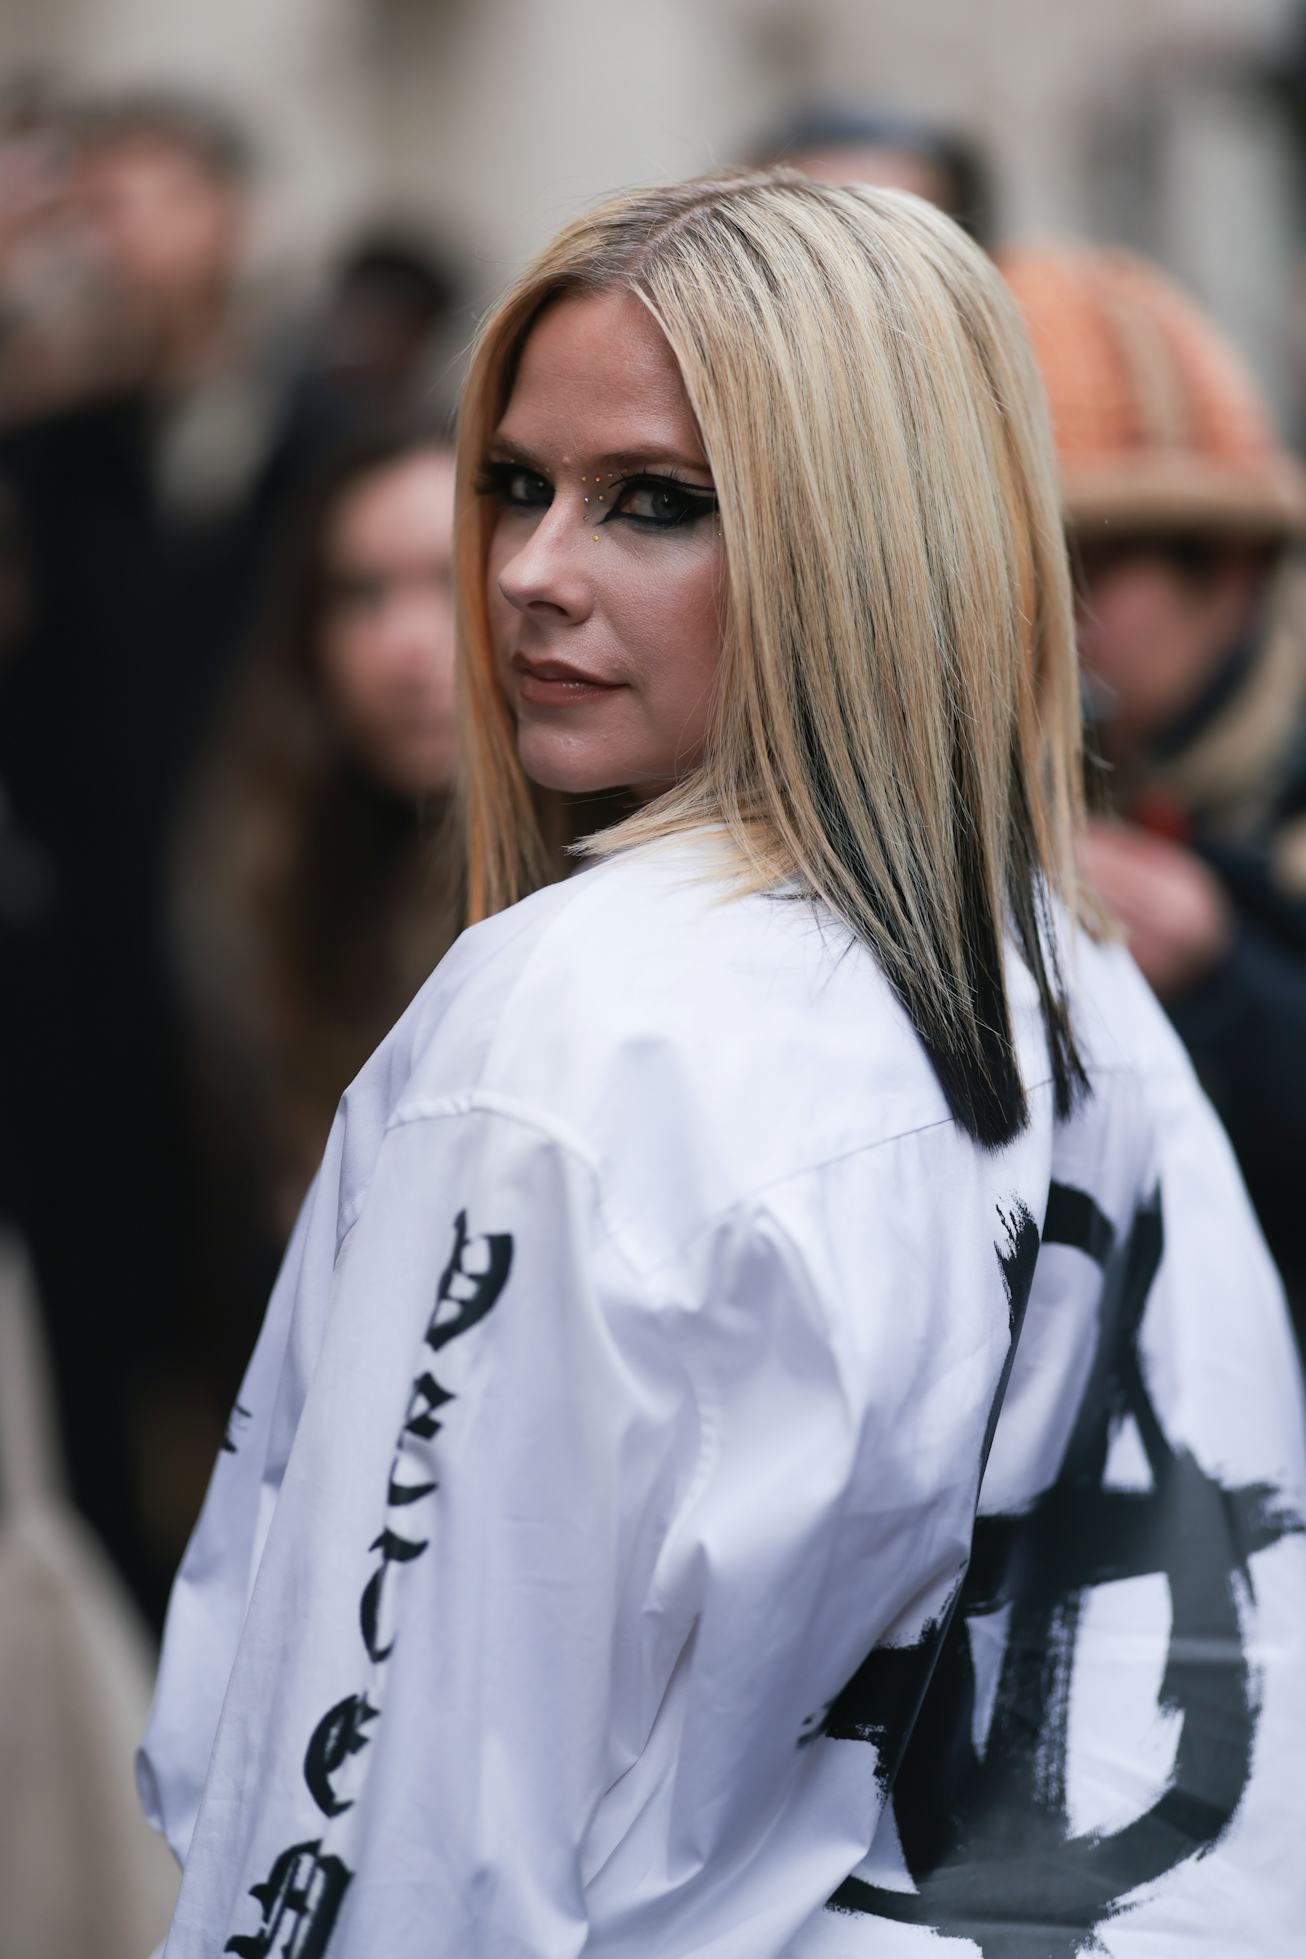 PARIS, FRANCE - MARCH 05: Avril Lavigne seen wearing a black and white jacket before the Ottolinger